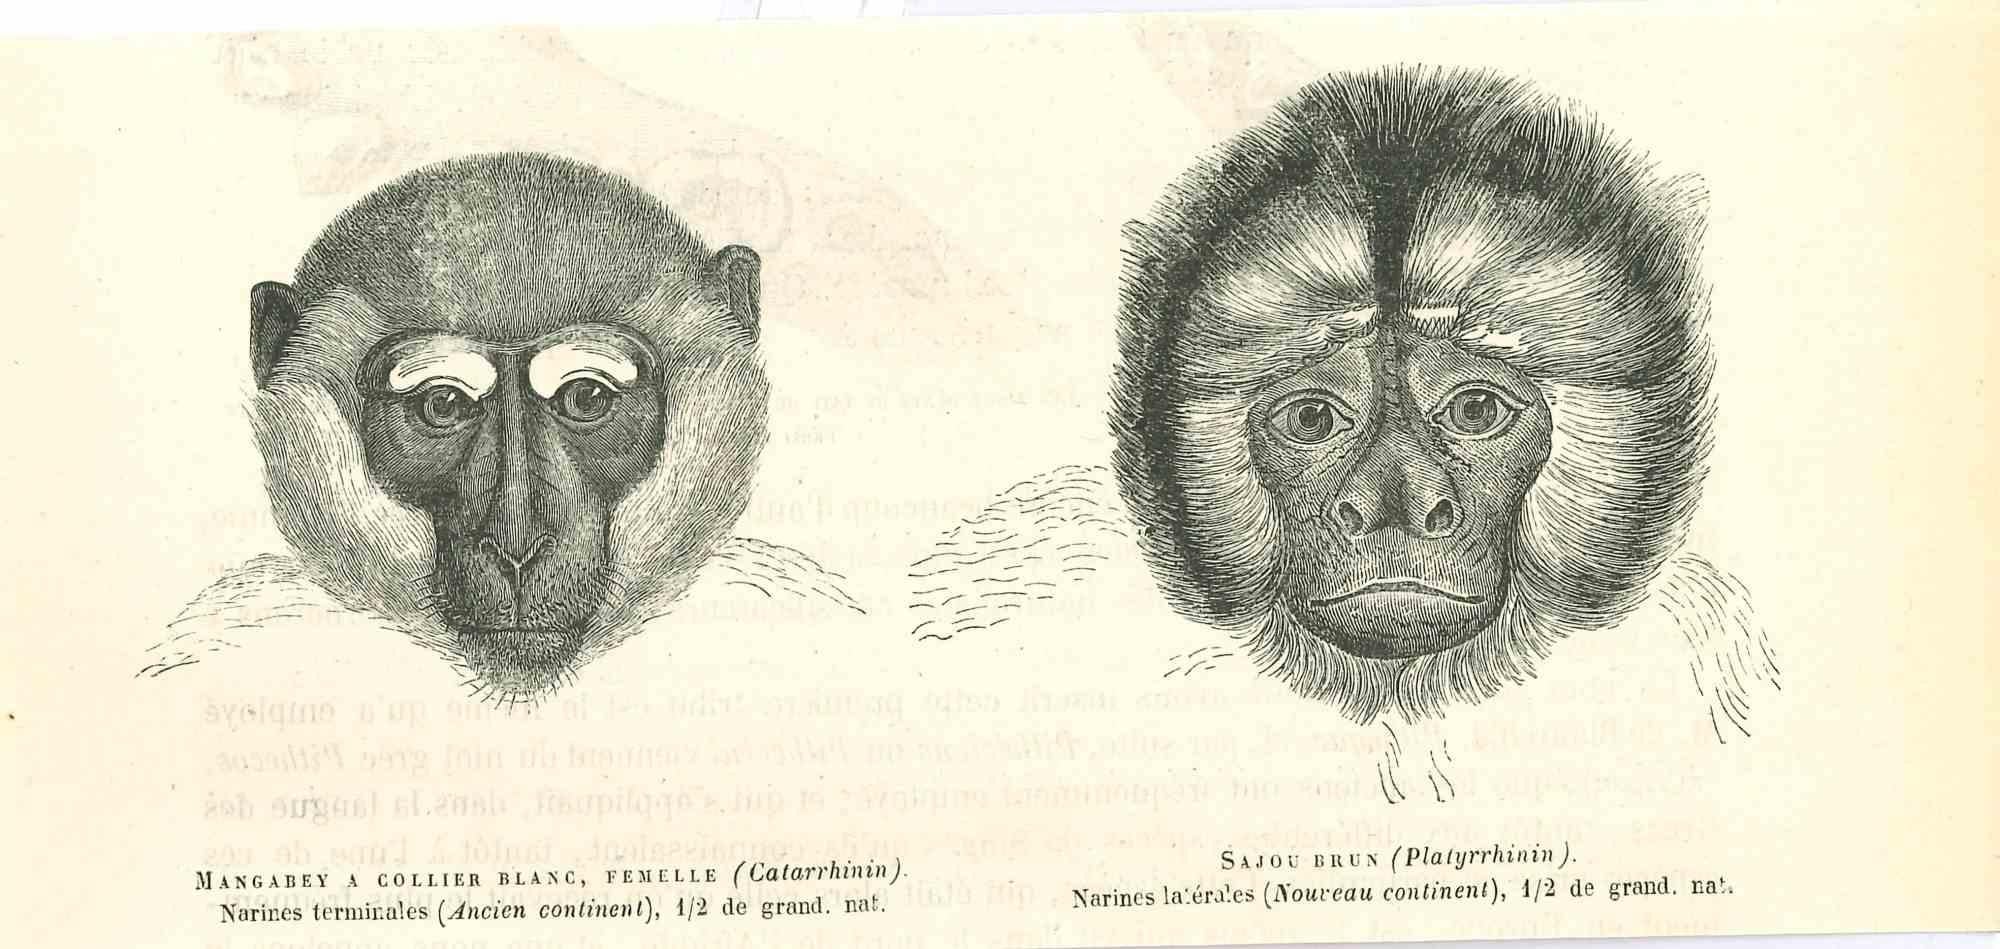 Monkeys is an original lithograph on ivory-colored paper, realized by Paul Gervais (1816-1879). The artwork is from The Series of "Les Trois Règnes de la Nature", and was published in 1854.

Good conditions.

Titled on the lower. With the notes on